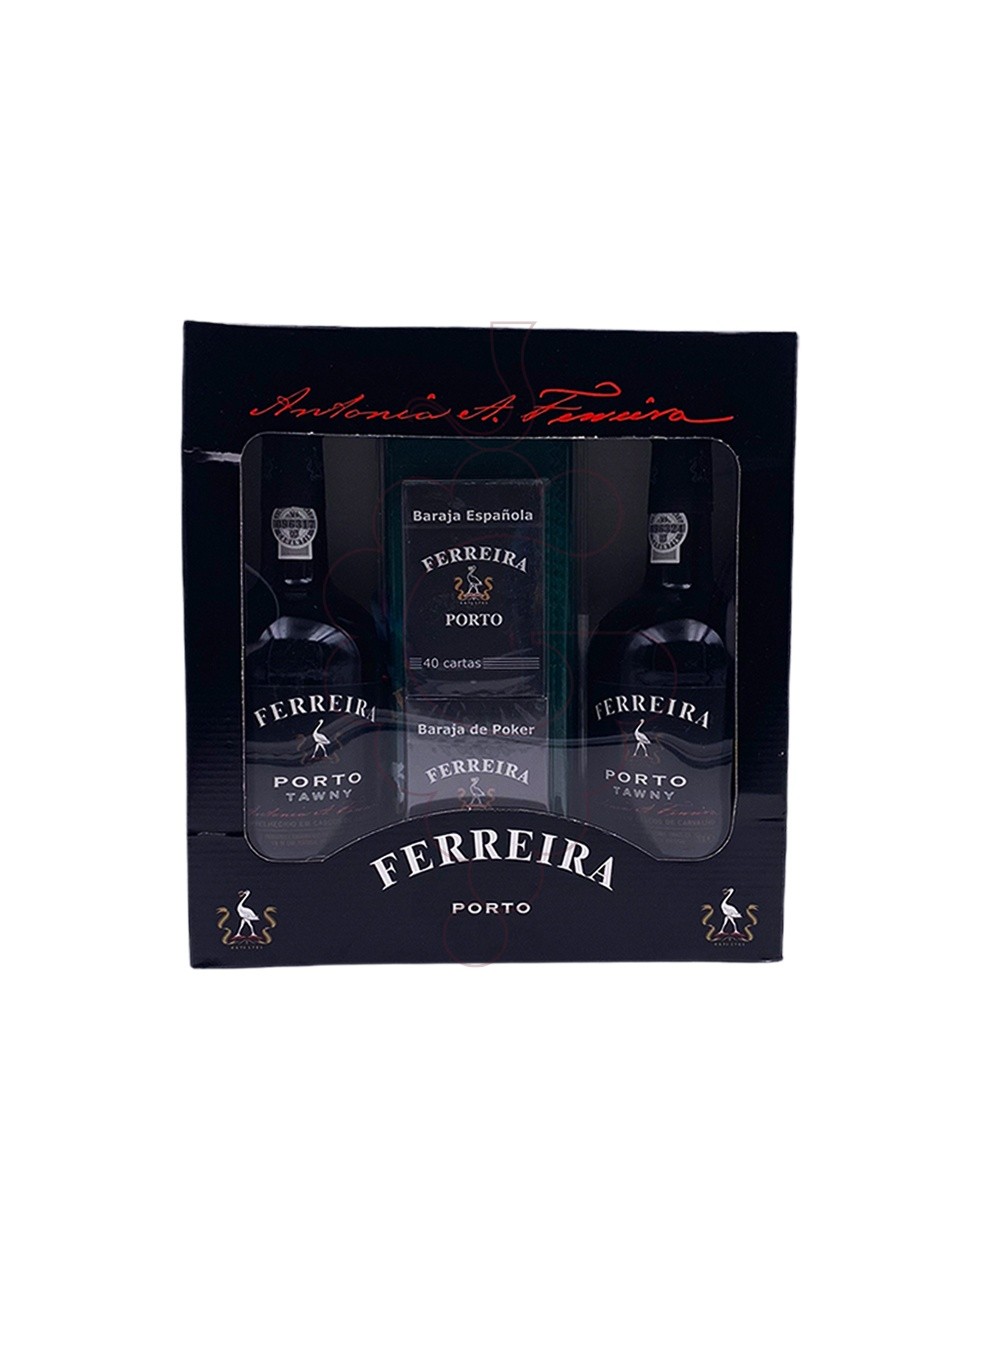 Photo Ferreira Pack 2 u + Deck of Cards fortified wine